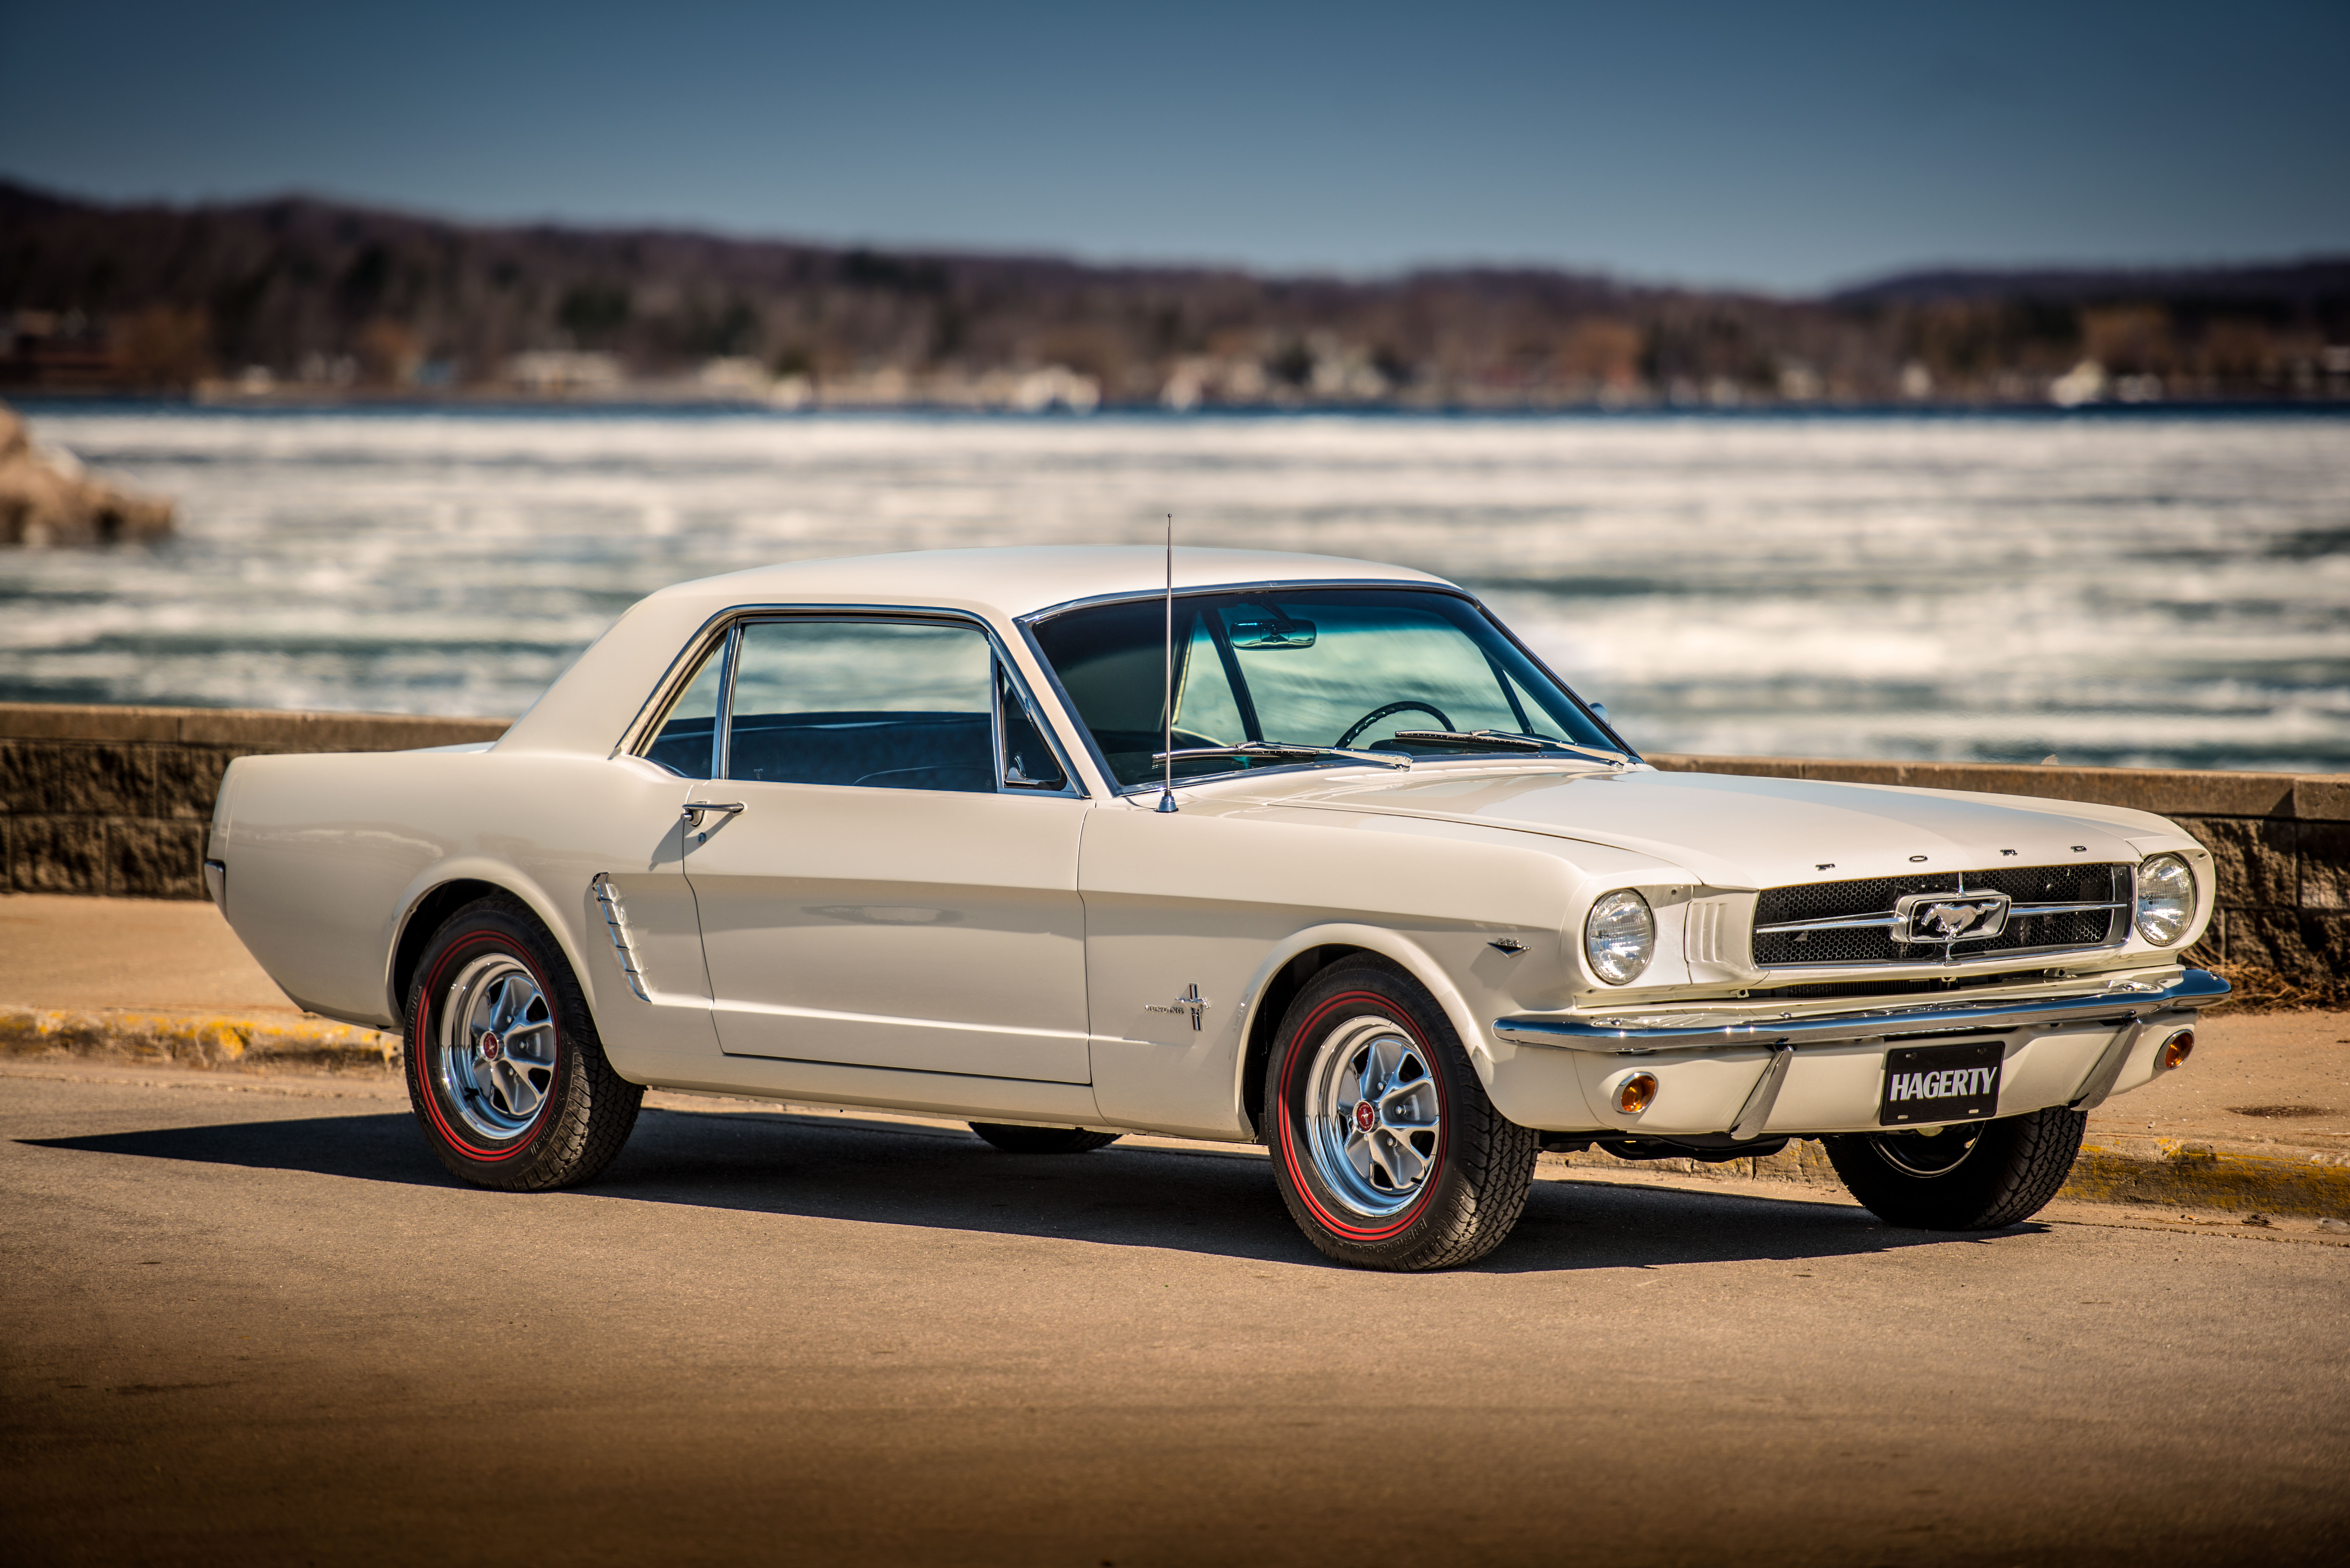 Winterizing: How to store your Mustang through the winter 